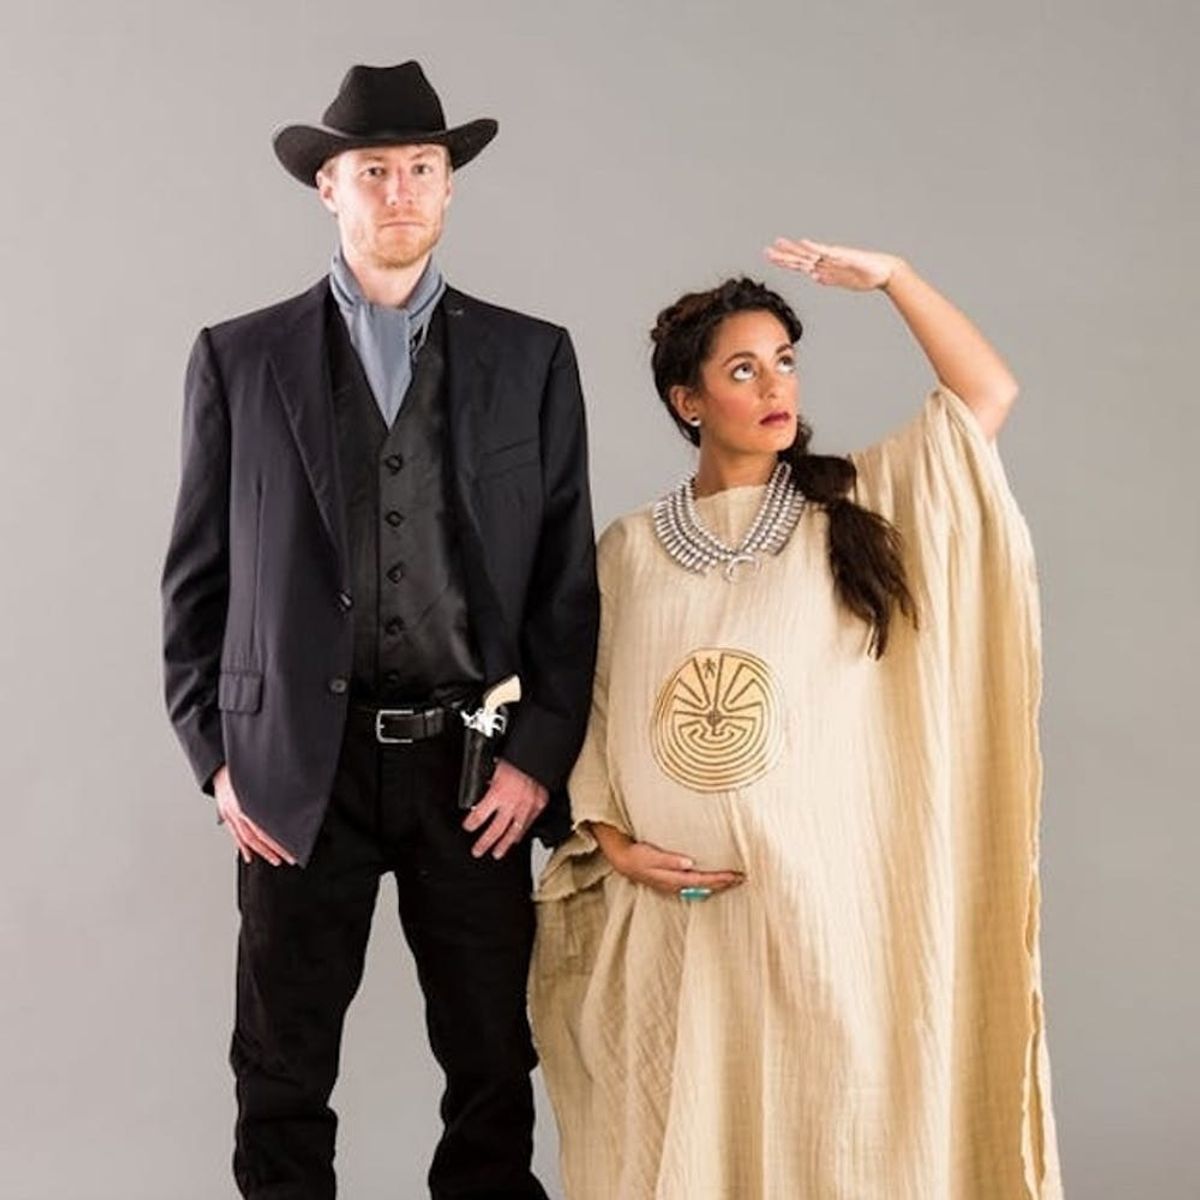 Live Out Your DIY Fantasies in These “Westworld” Halloween Costumes